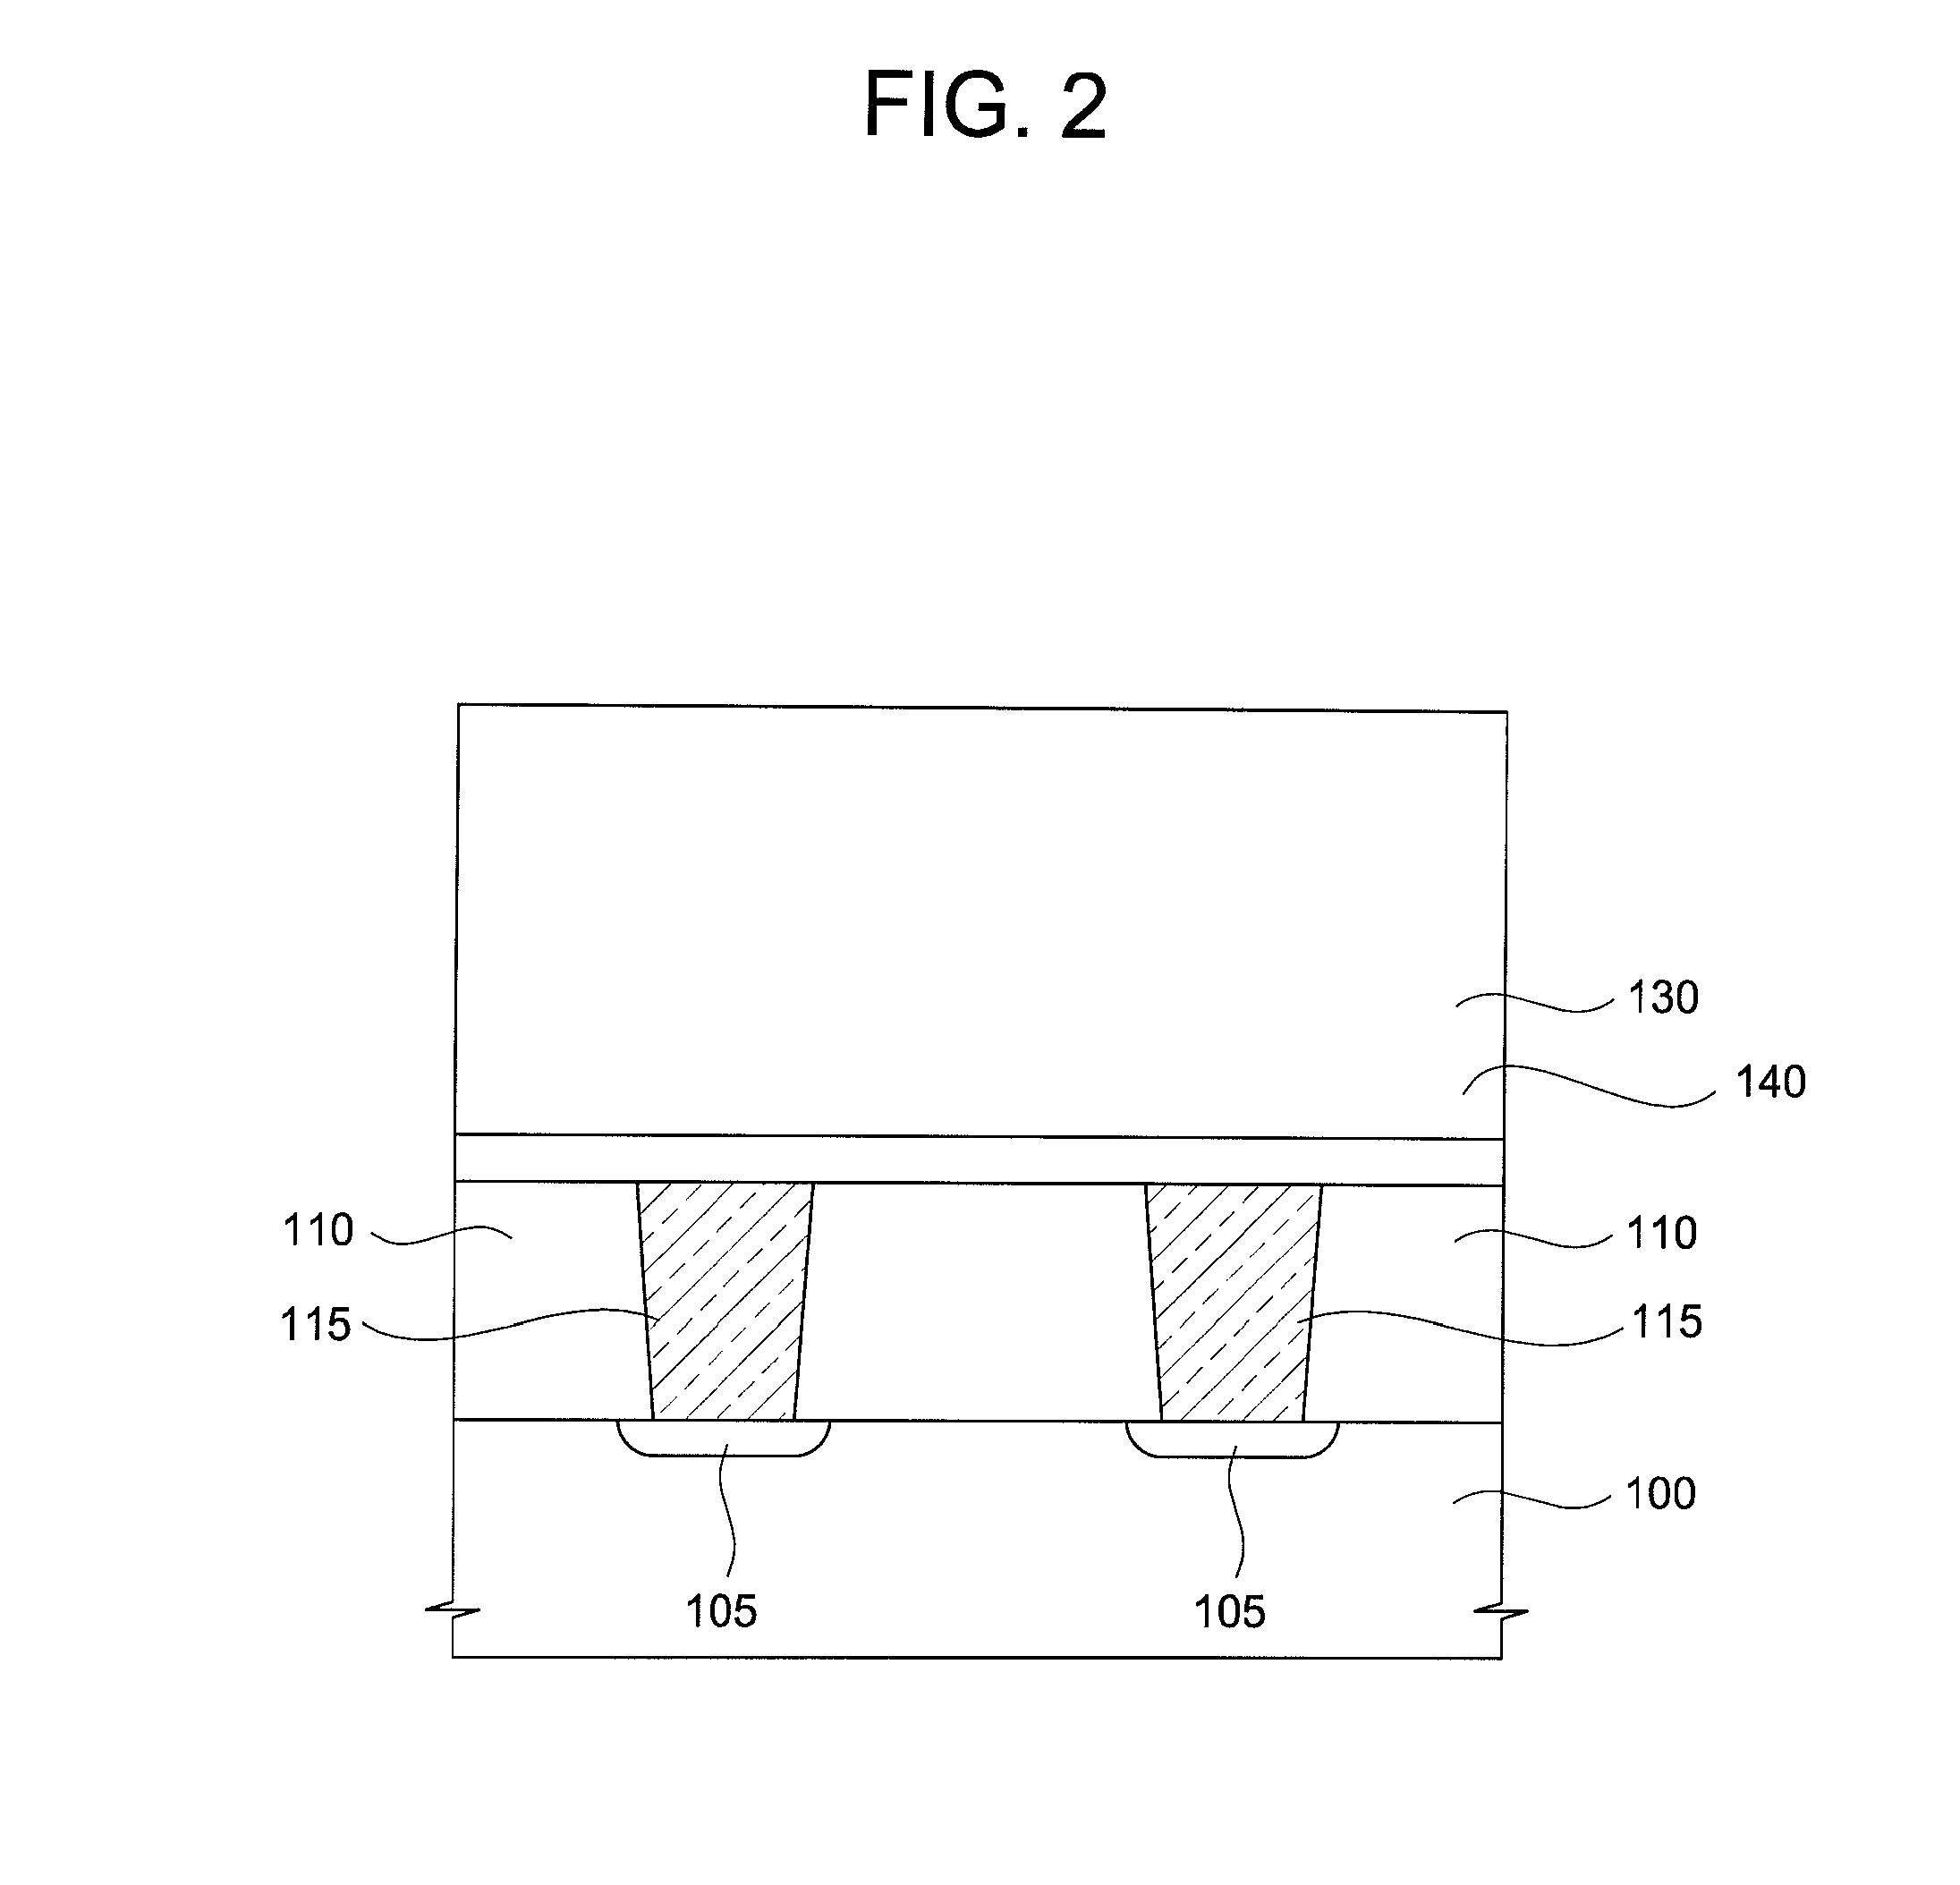 CAPACITOR HAVING Ru ELECTRODE AND TiO2 DIELECTRIC LAYER FOR SEMICONDUCTOR DEVICE AND METHOD OF FABRICATING THE SAME